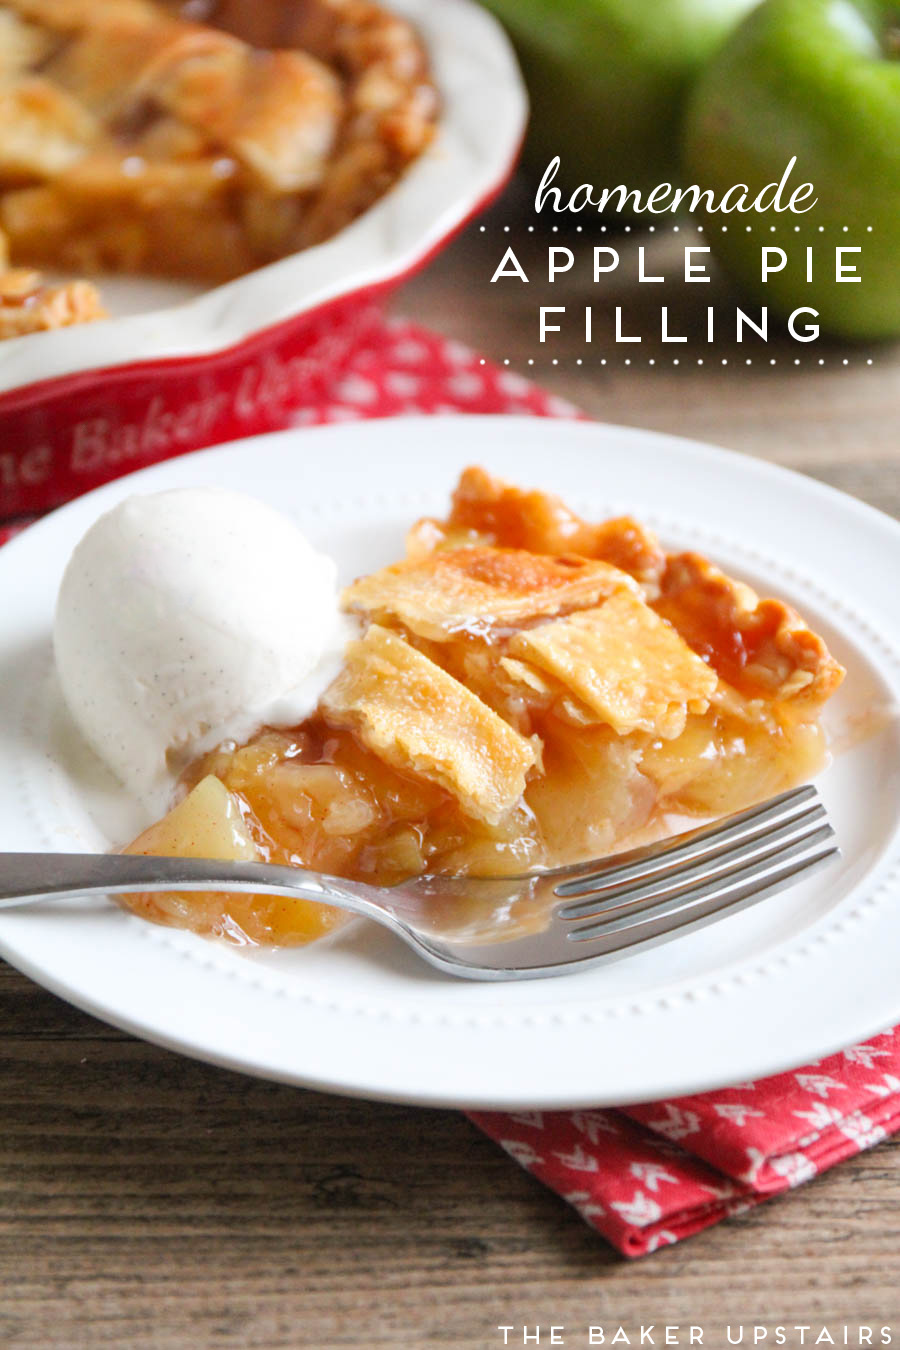 This homemade apple pie filling is so delicious and flavorful, and makes the best apple pie ever!